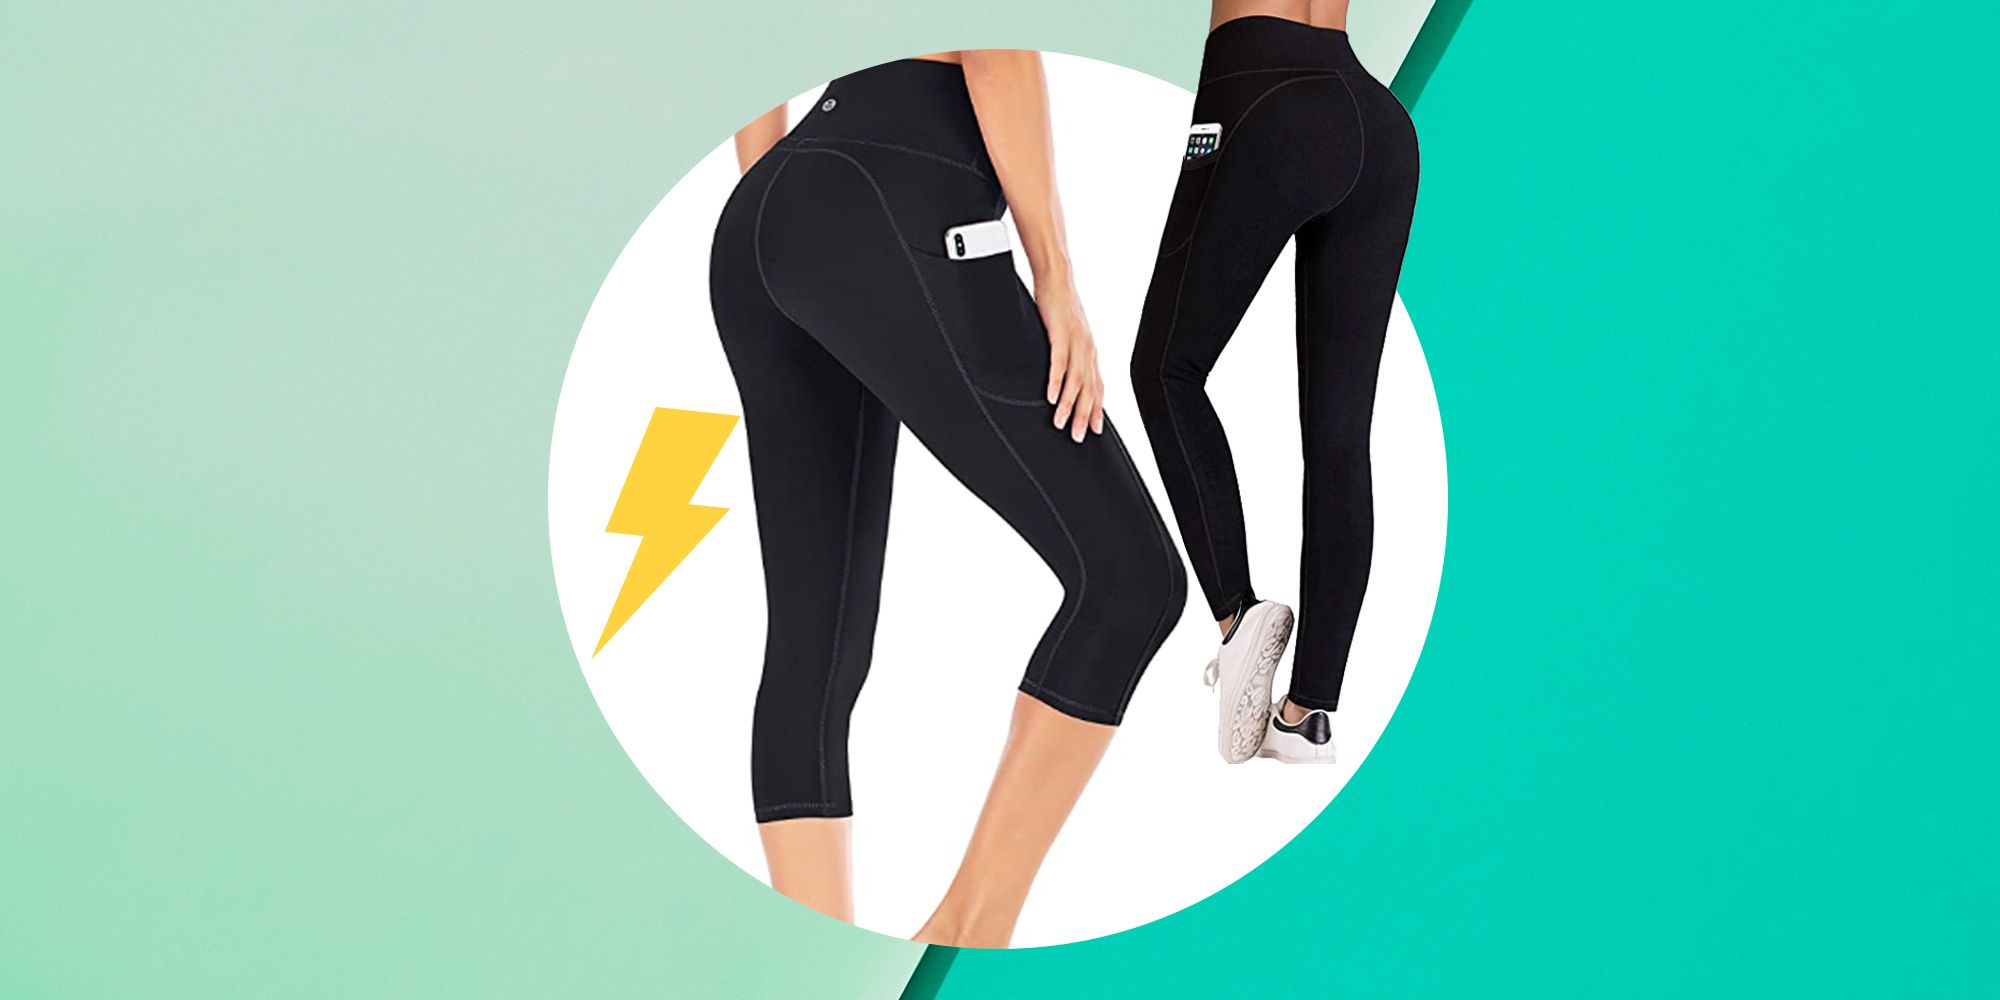 Buy XTRYTRUI TIK Tok High Waist Yoga Pants for Women Work Out Leggings and  Butt Lift Soft and Tummy Control Black XXL at Amazonin